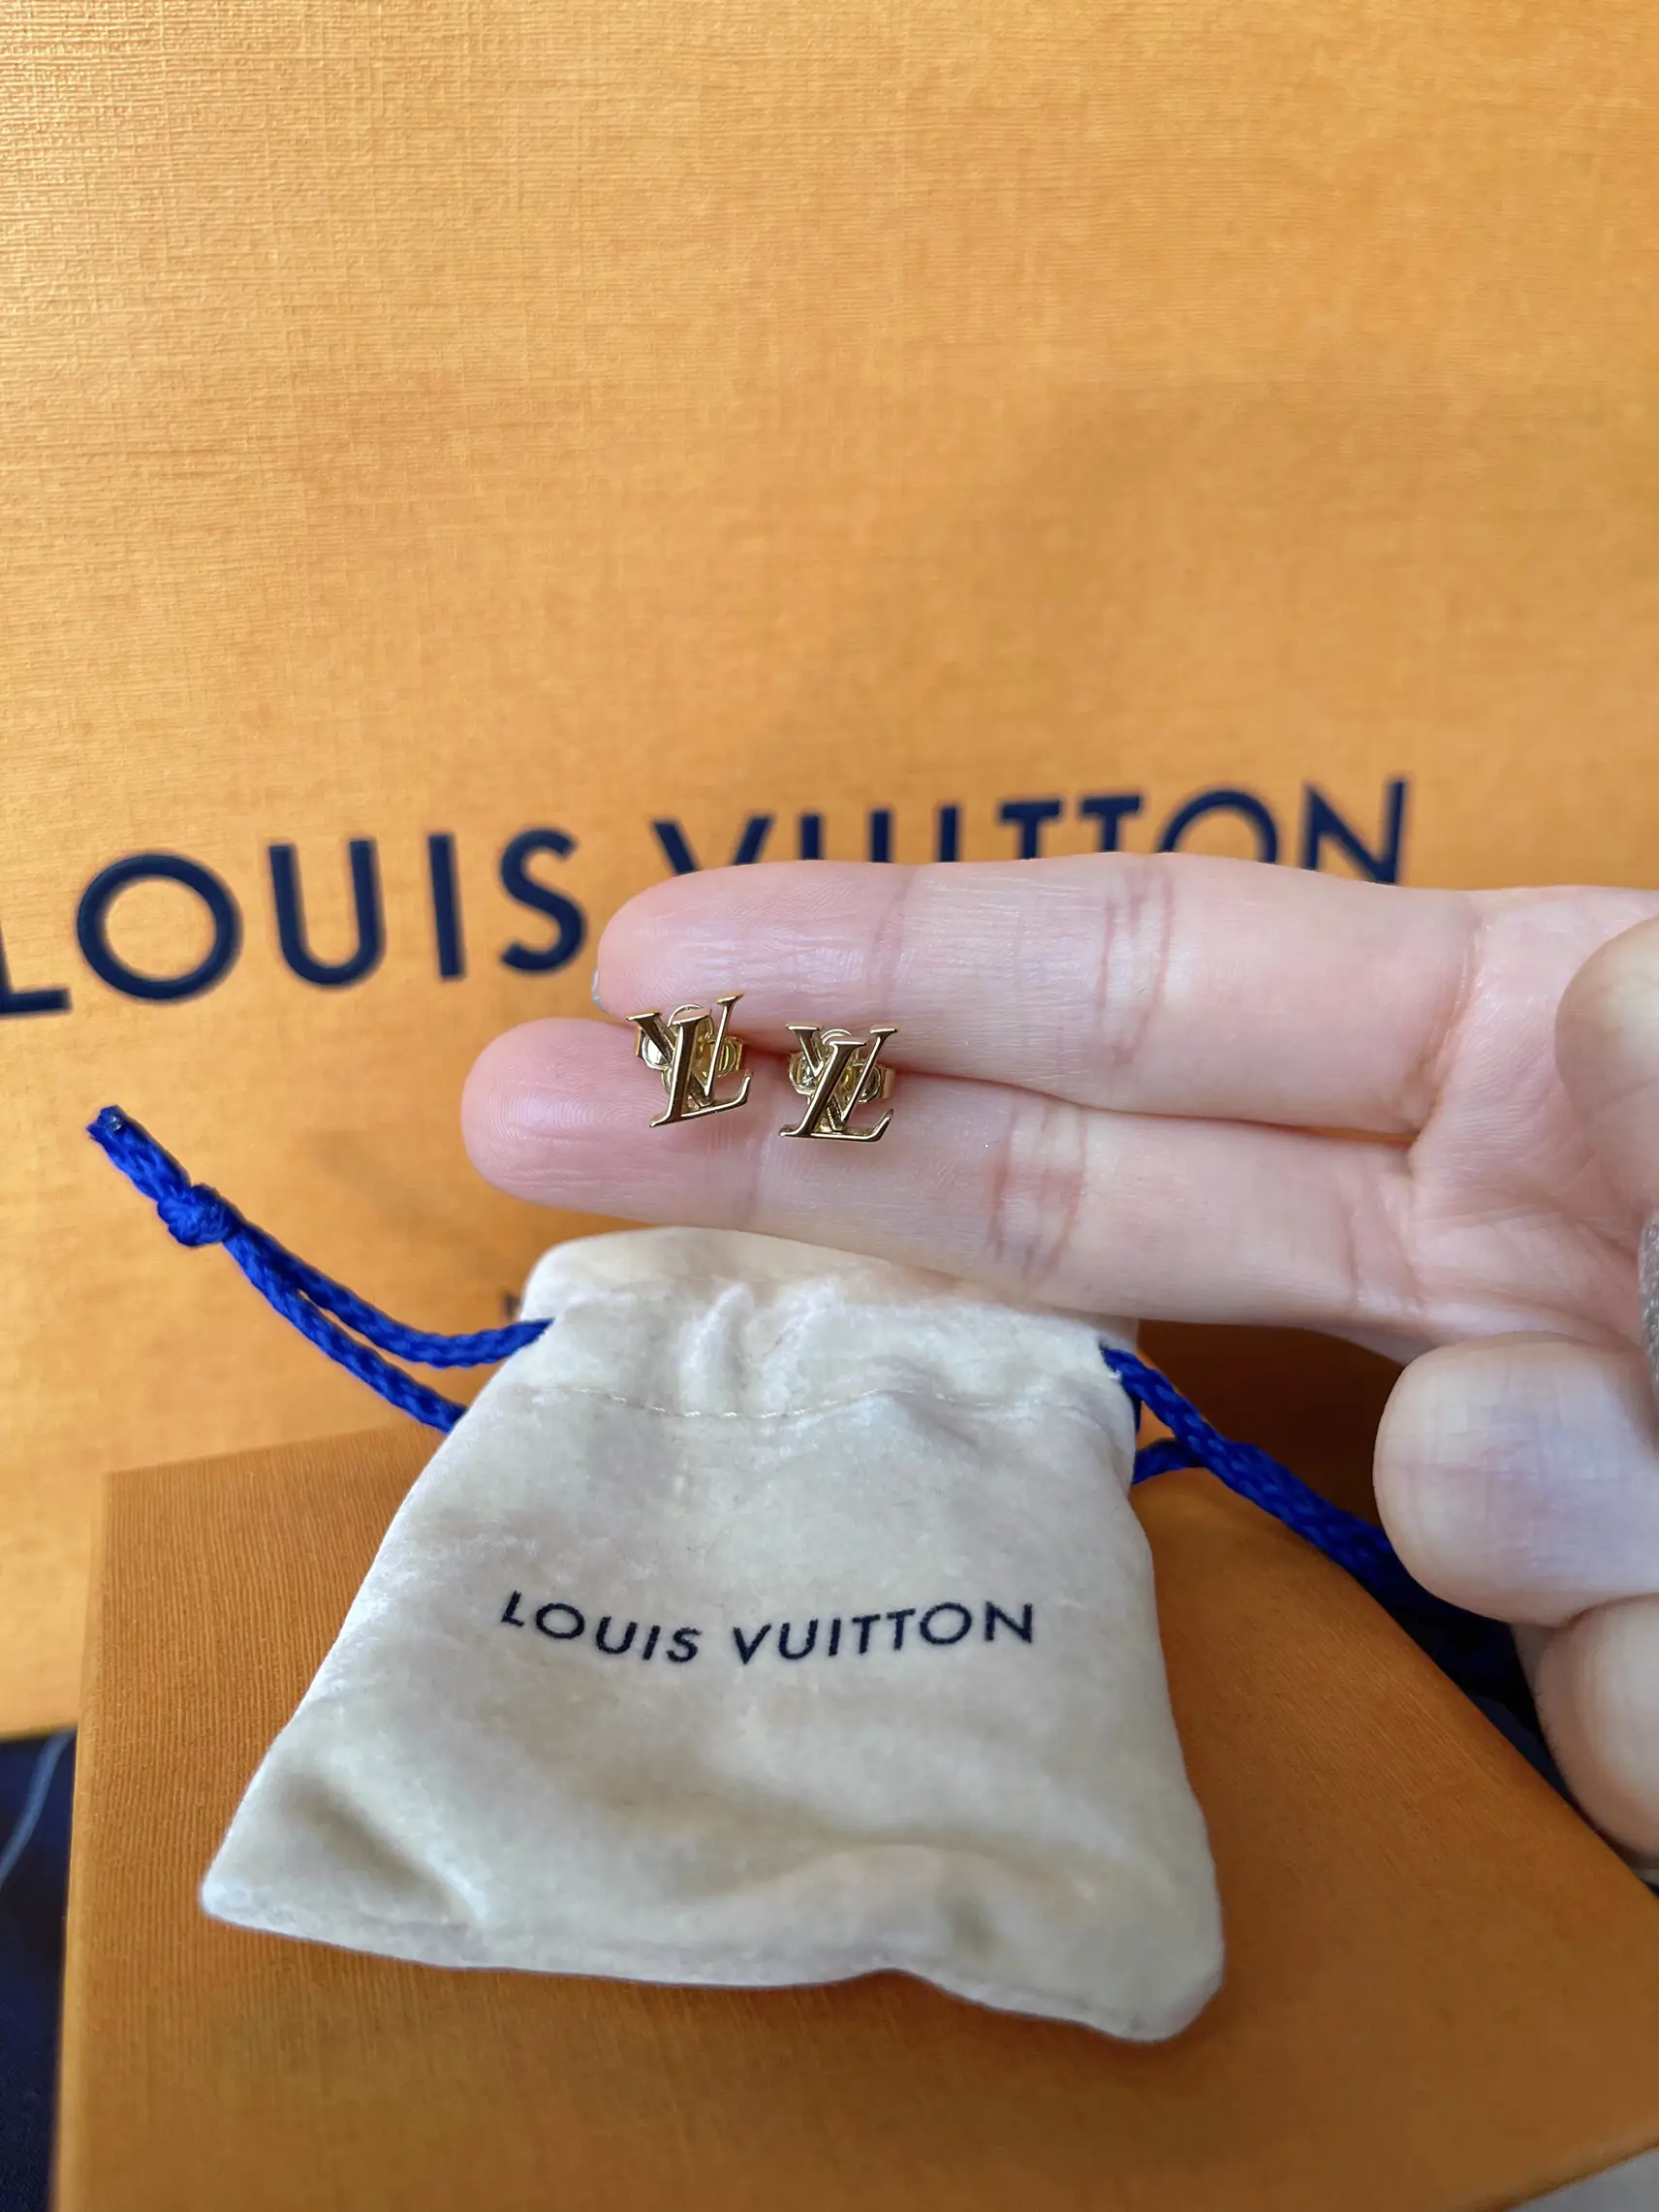 Louis Vuitton, Jewelry, One Lv Louise Pm Earring